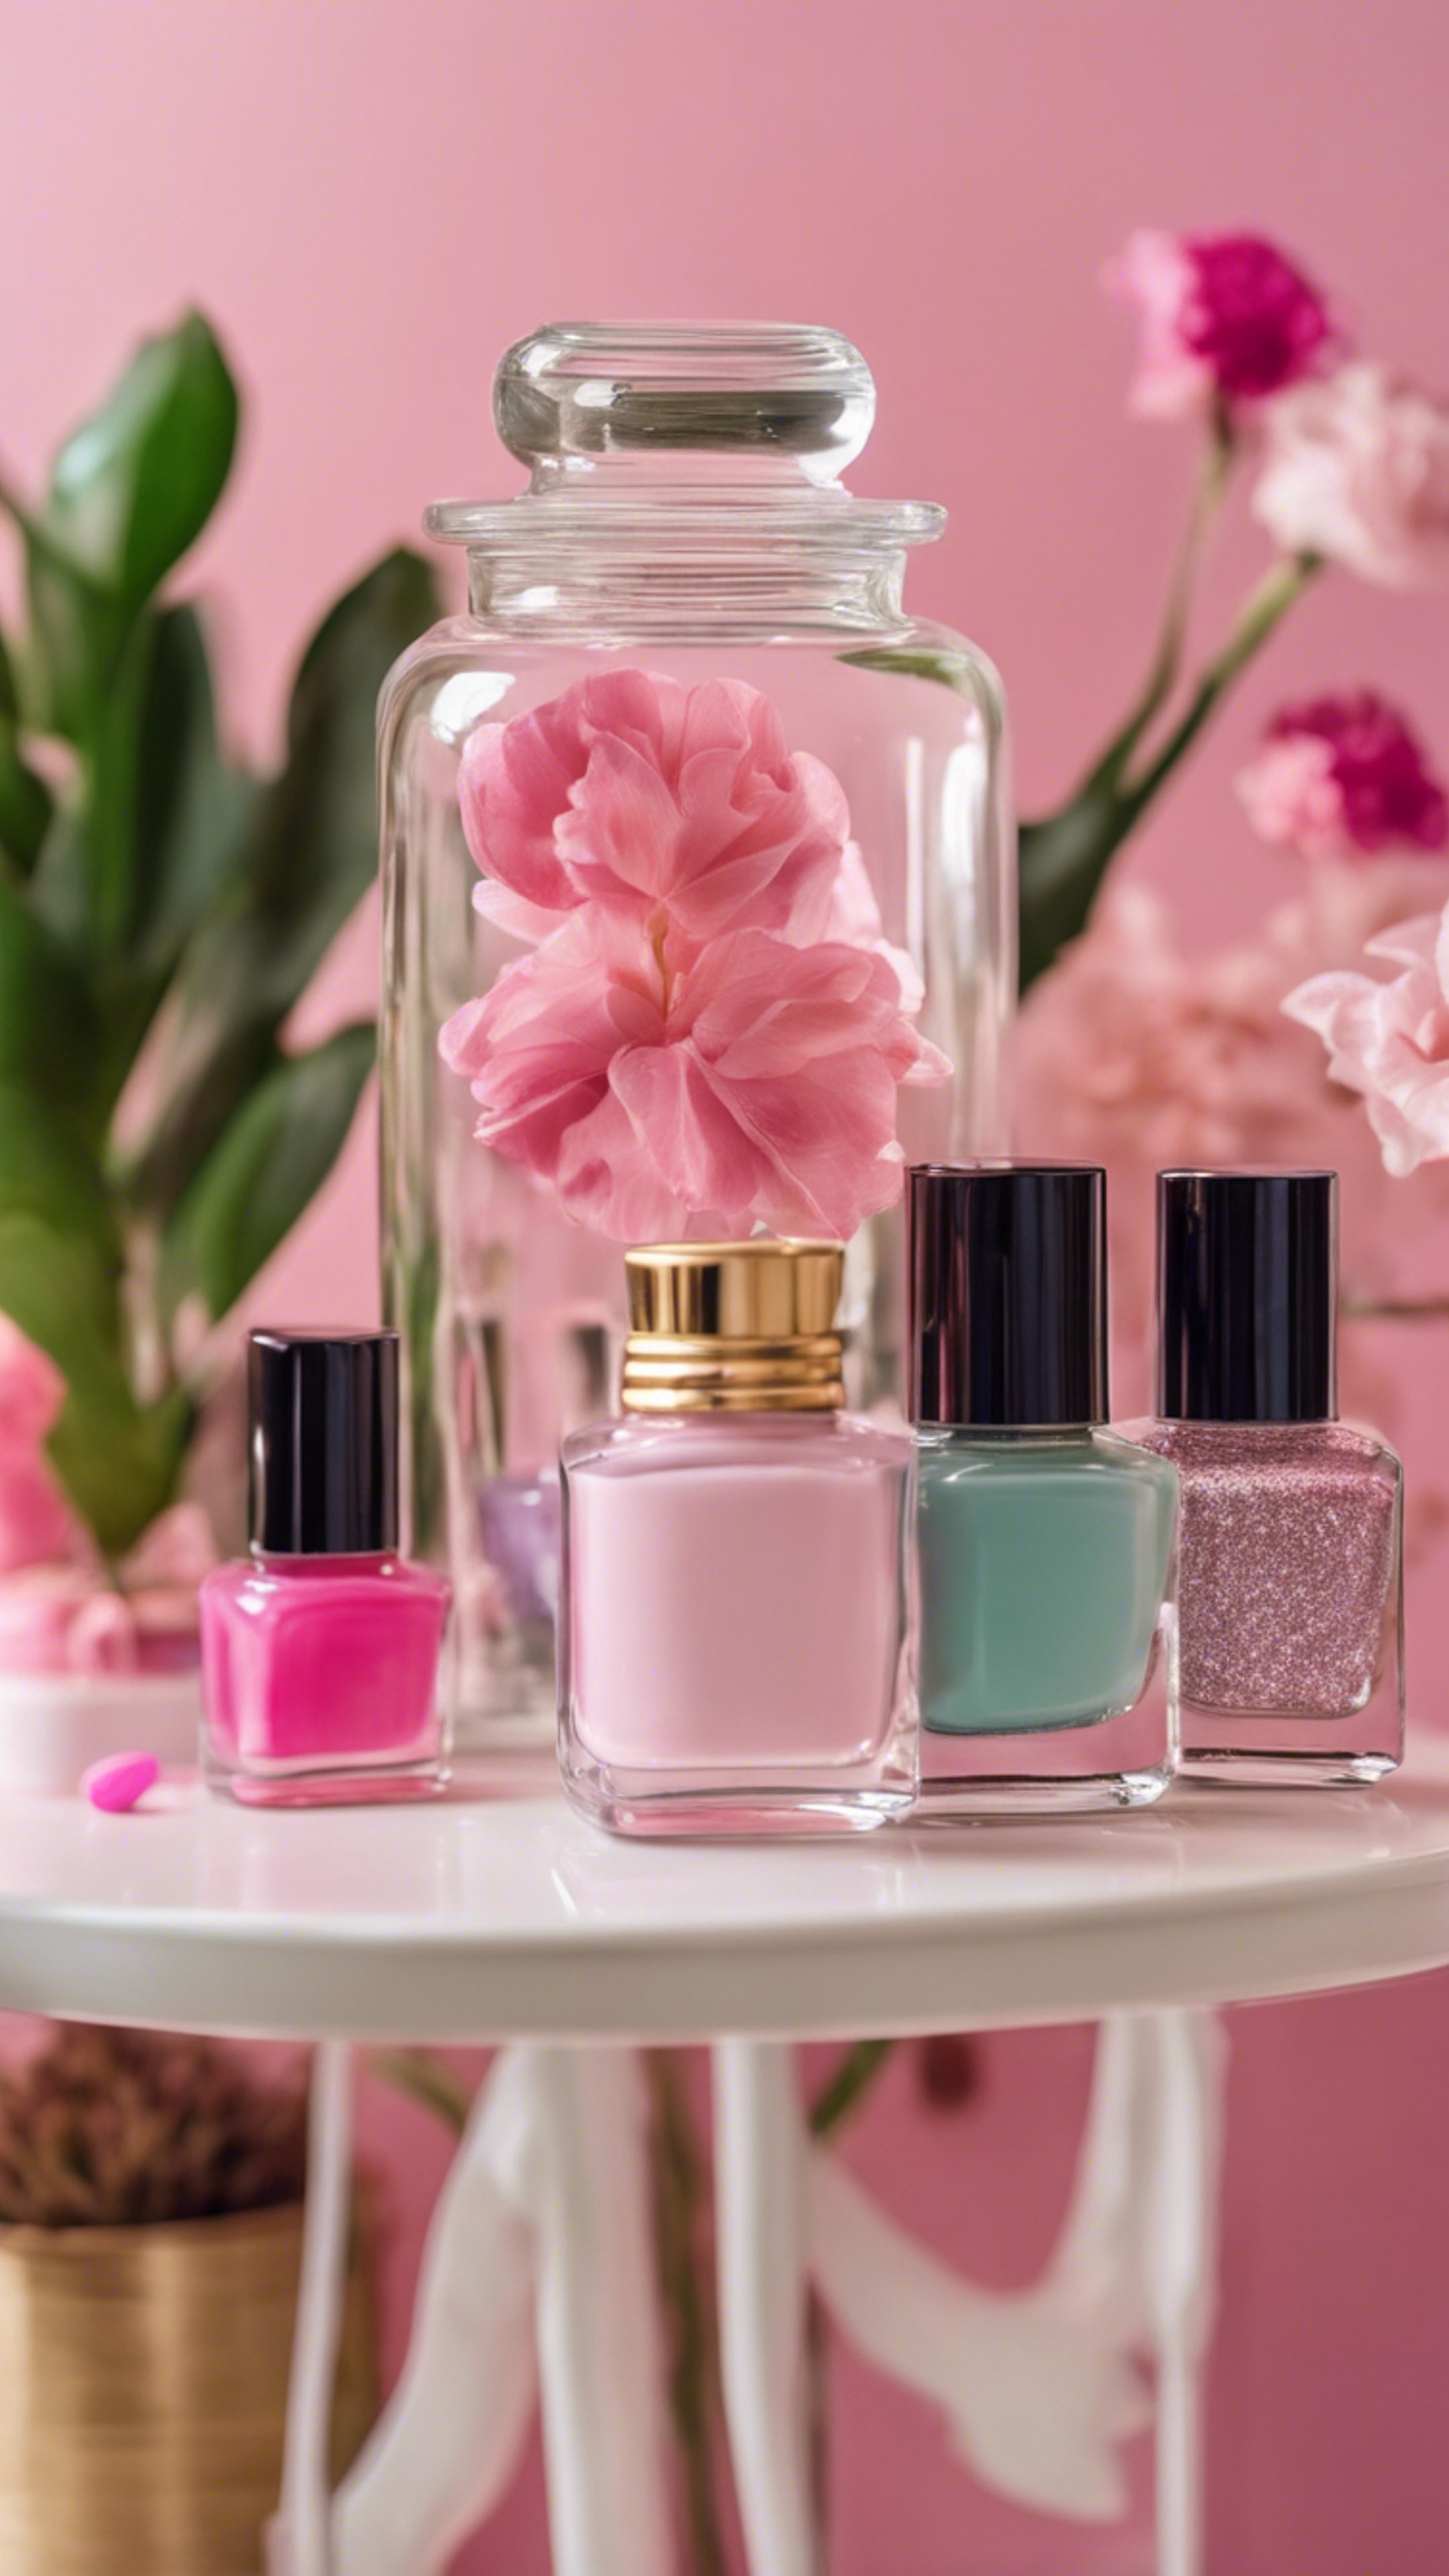 A glass jar full of colorful girly nail polishes on a pink dressing table with a chic plant in the background. Валлпапер[6e6d72fe0d8e4450902a]